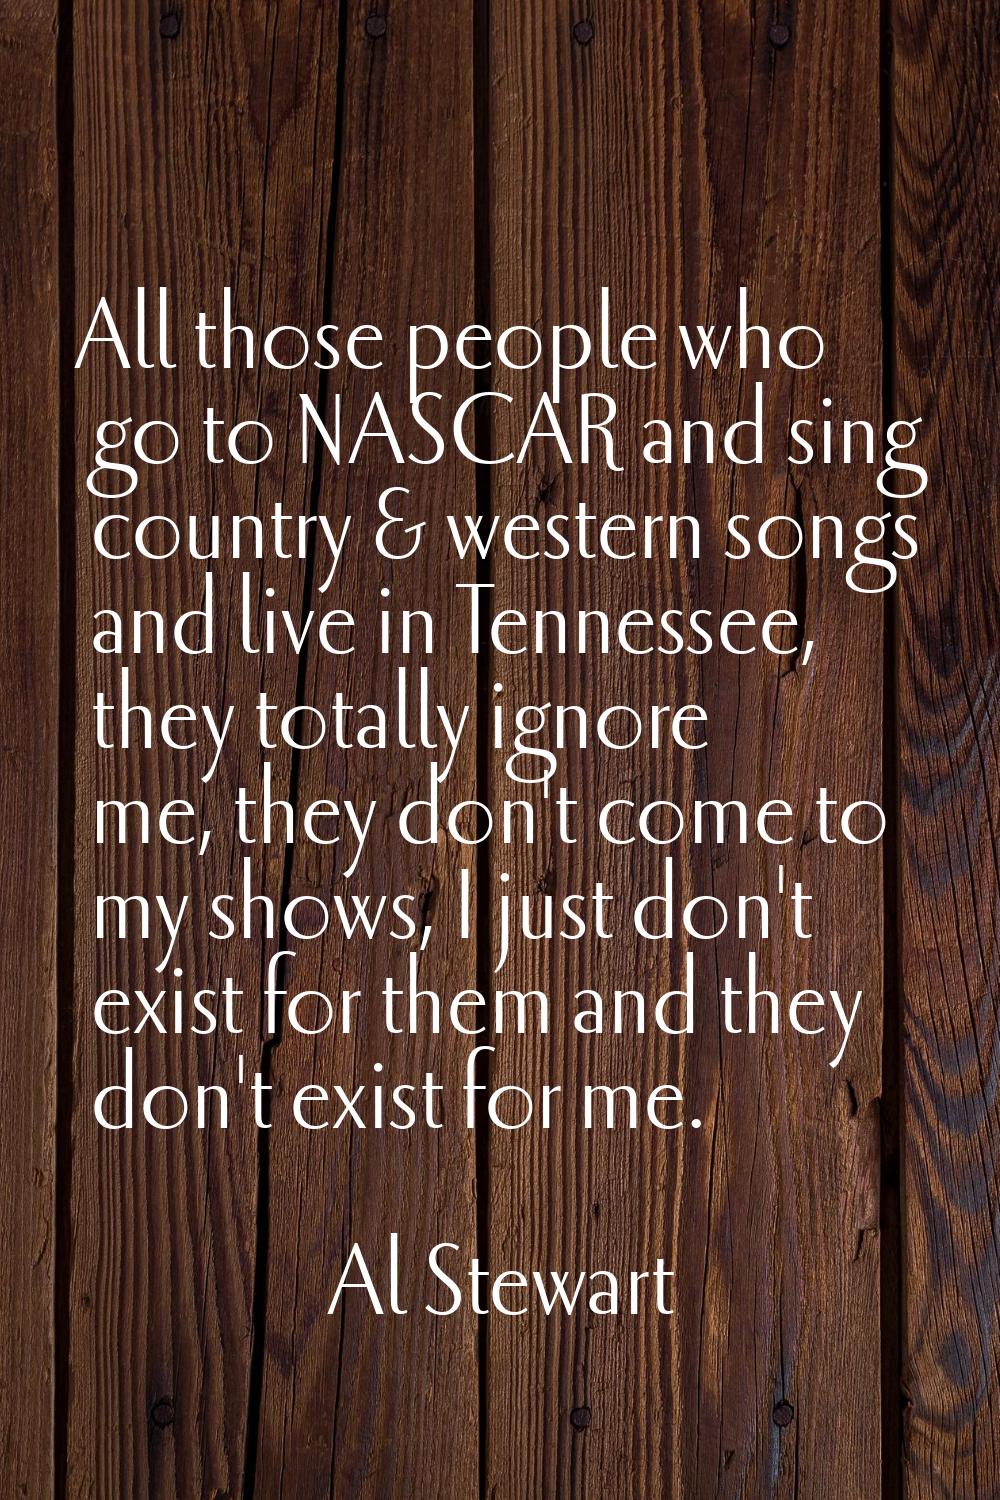 All those people who go to NASCAR and sing country & western songs and live in Tennessee, they tota